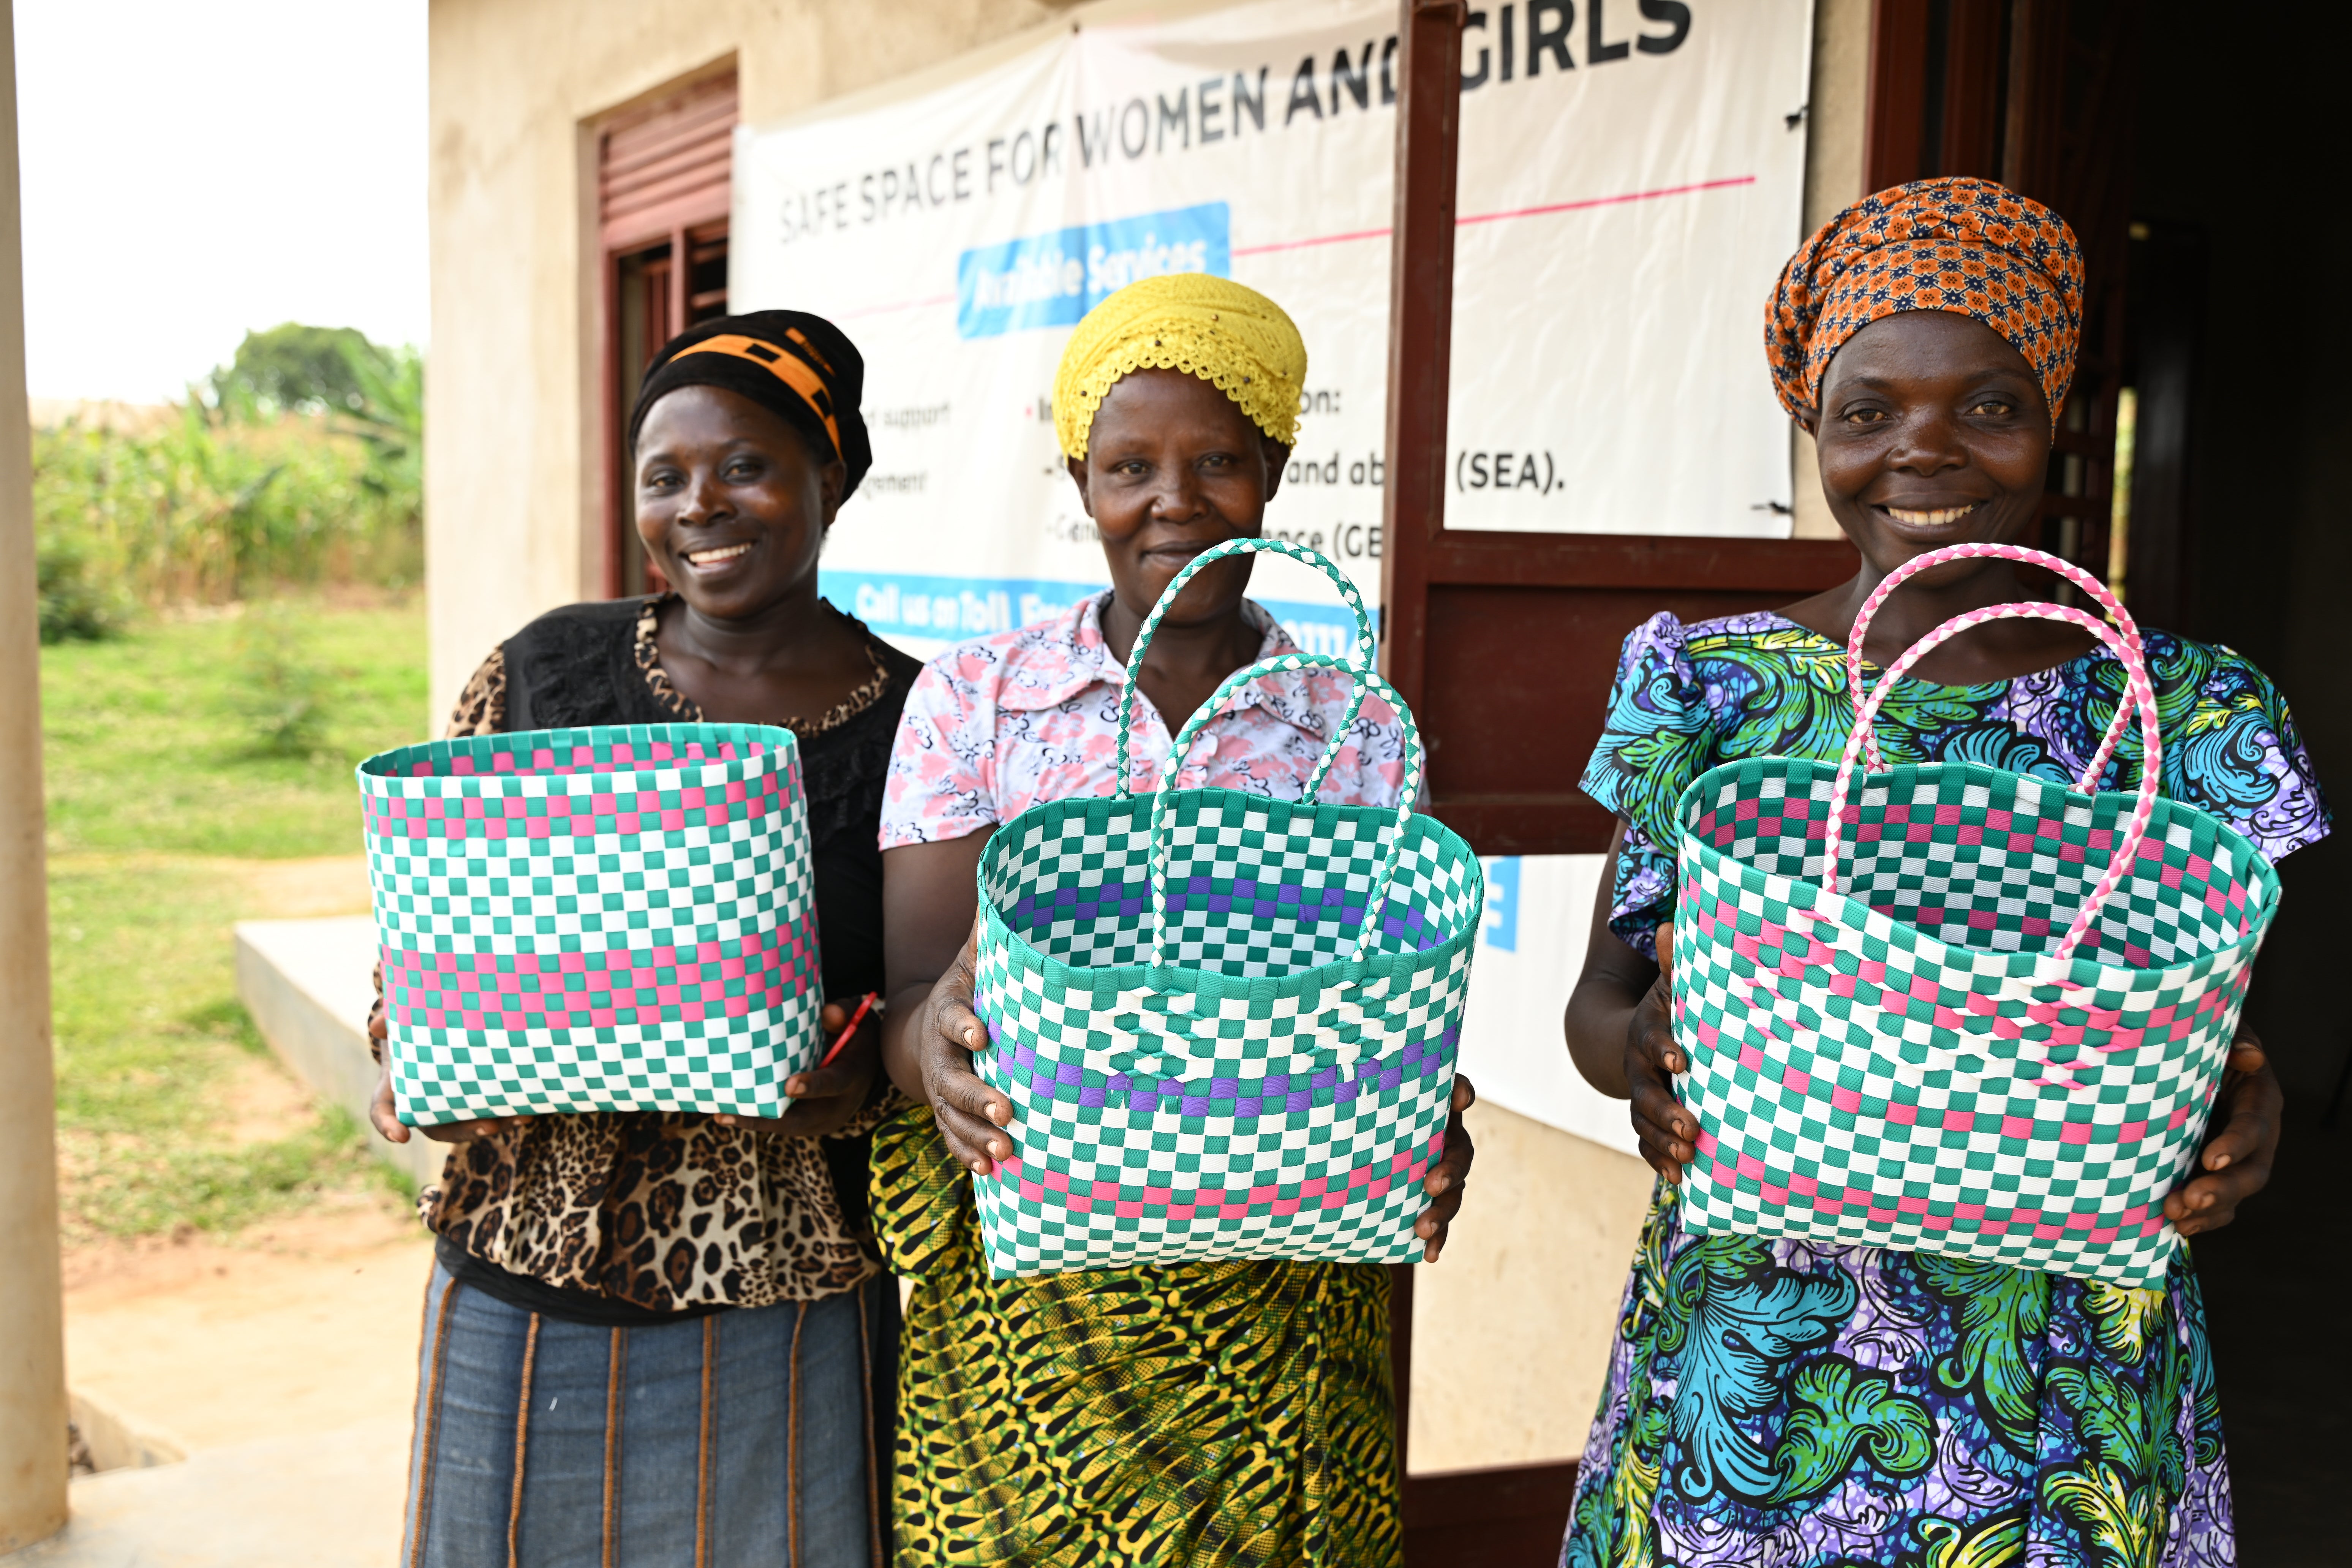 Some of the members of New Hope VSLA displaying baskets they make as a group to earn income. The group meets at the safe space constructed in their community by UN Women with funding from the UN CERF. Photo credit: UN Women / James Ochweri